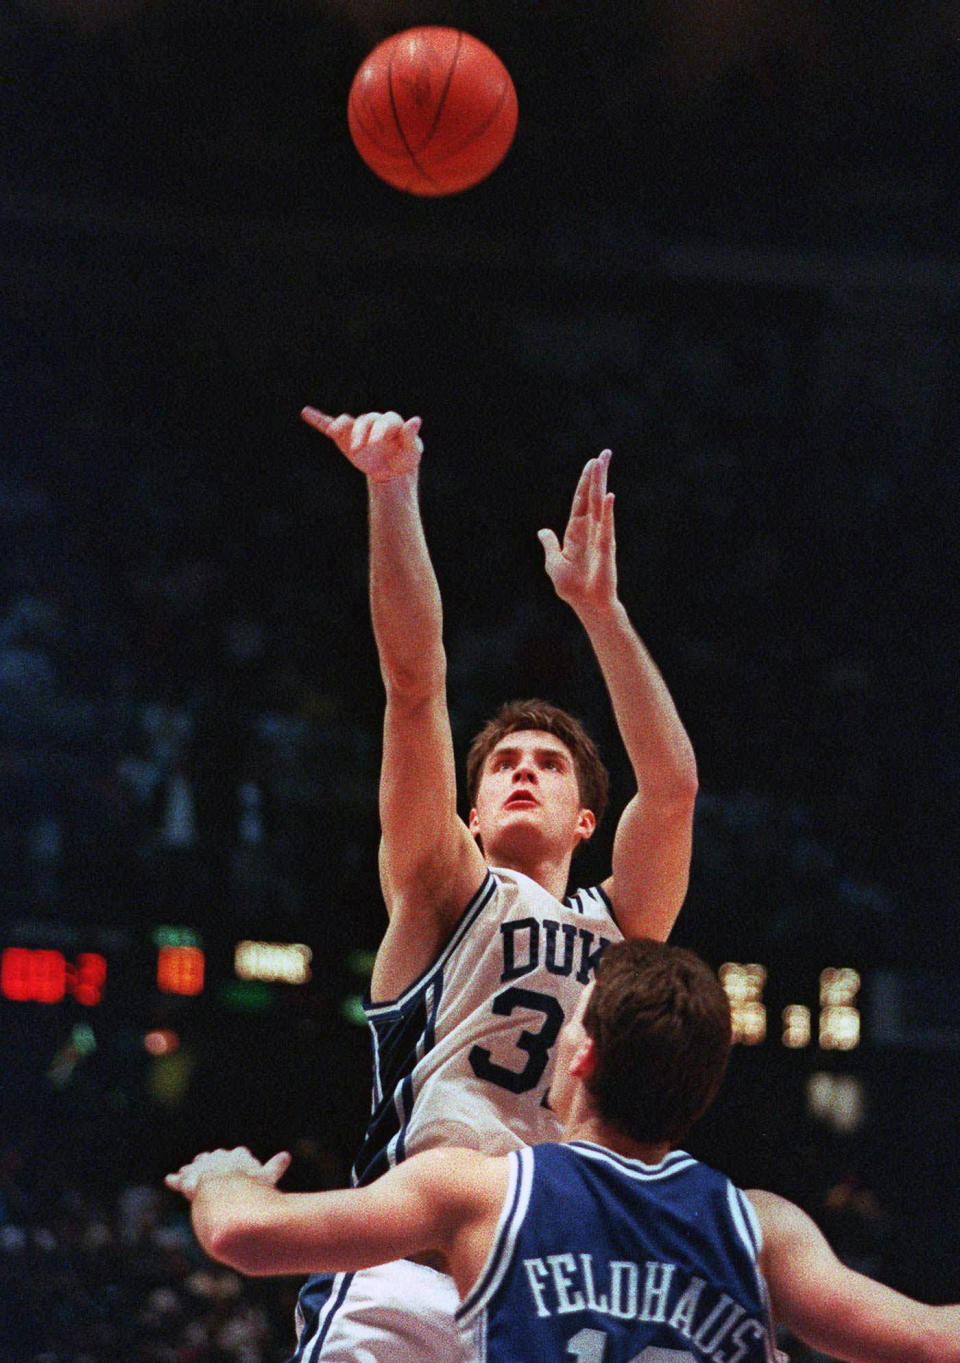 FILE - In this March 28, 1992, file photo, Duke's Christian Laettner takes the winning shot in overtime over Kentucky's Deron Feldhaus for a 104-103 victory in the East Regional final NCAA college basketball game in Philadelphia. (AP Photo/Charles Arbogast, File)